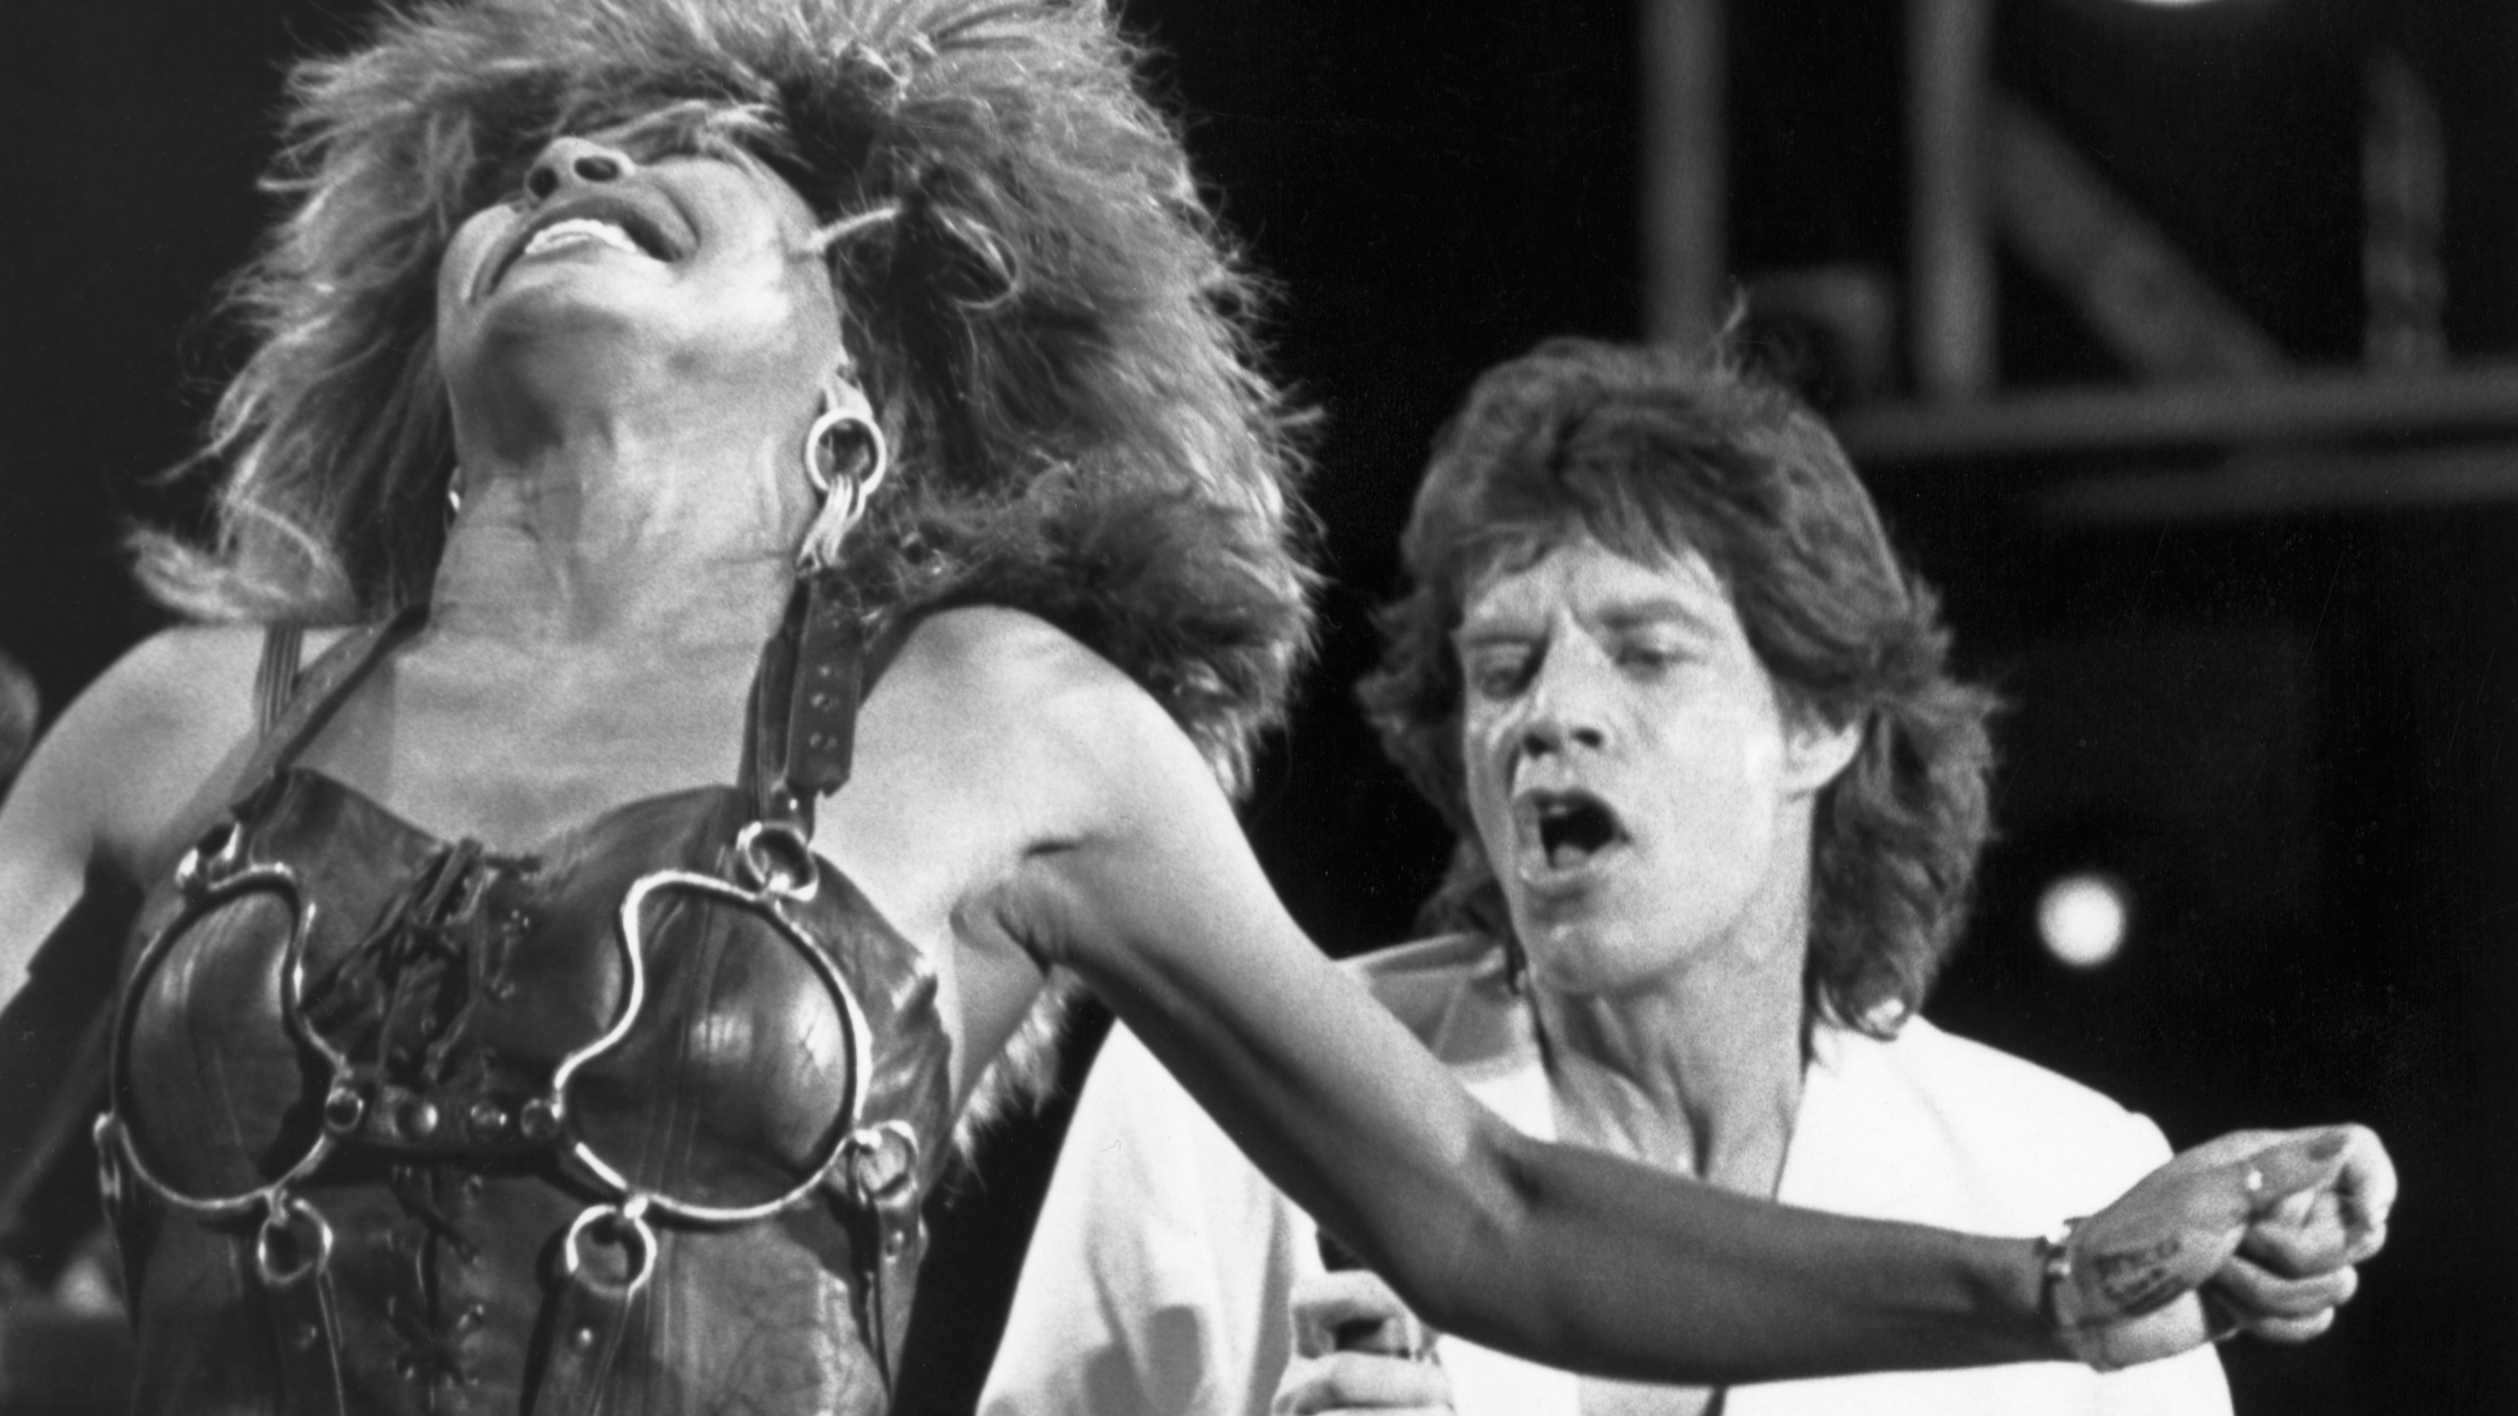 I will never forget her': Mick Jagger leads emotional tributes to Tina  Turner